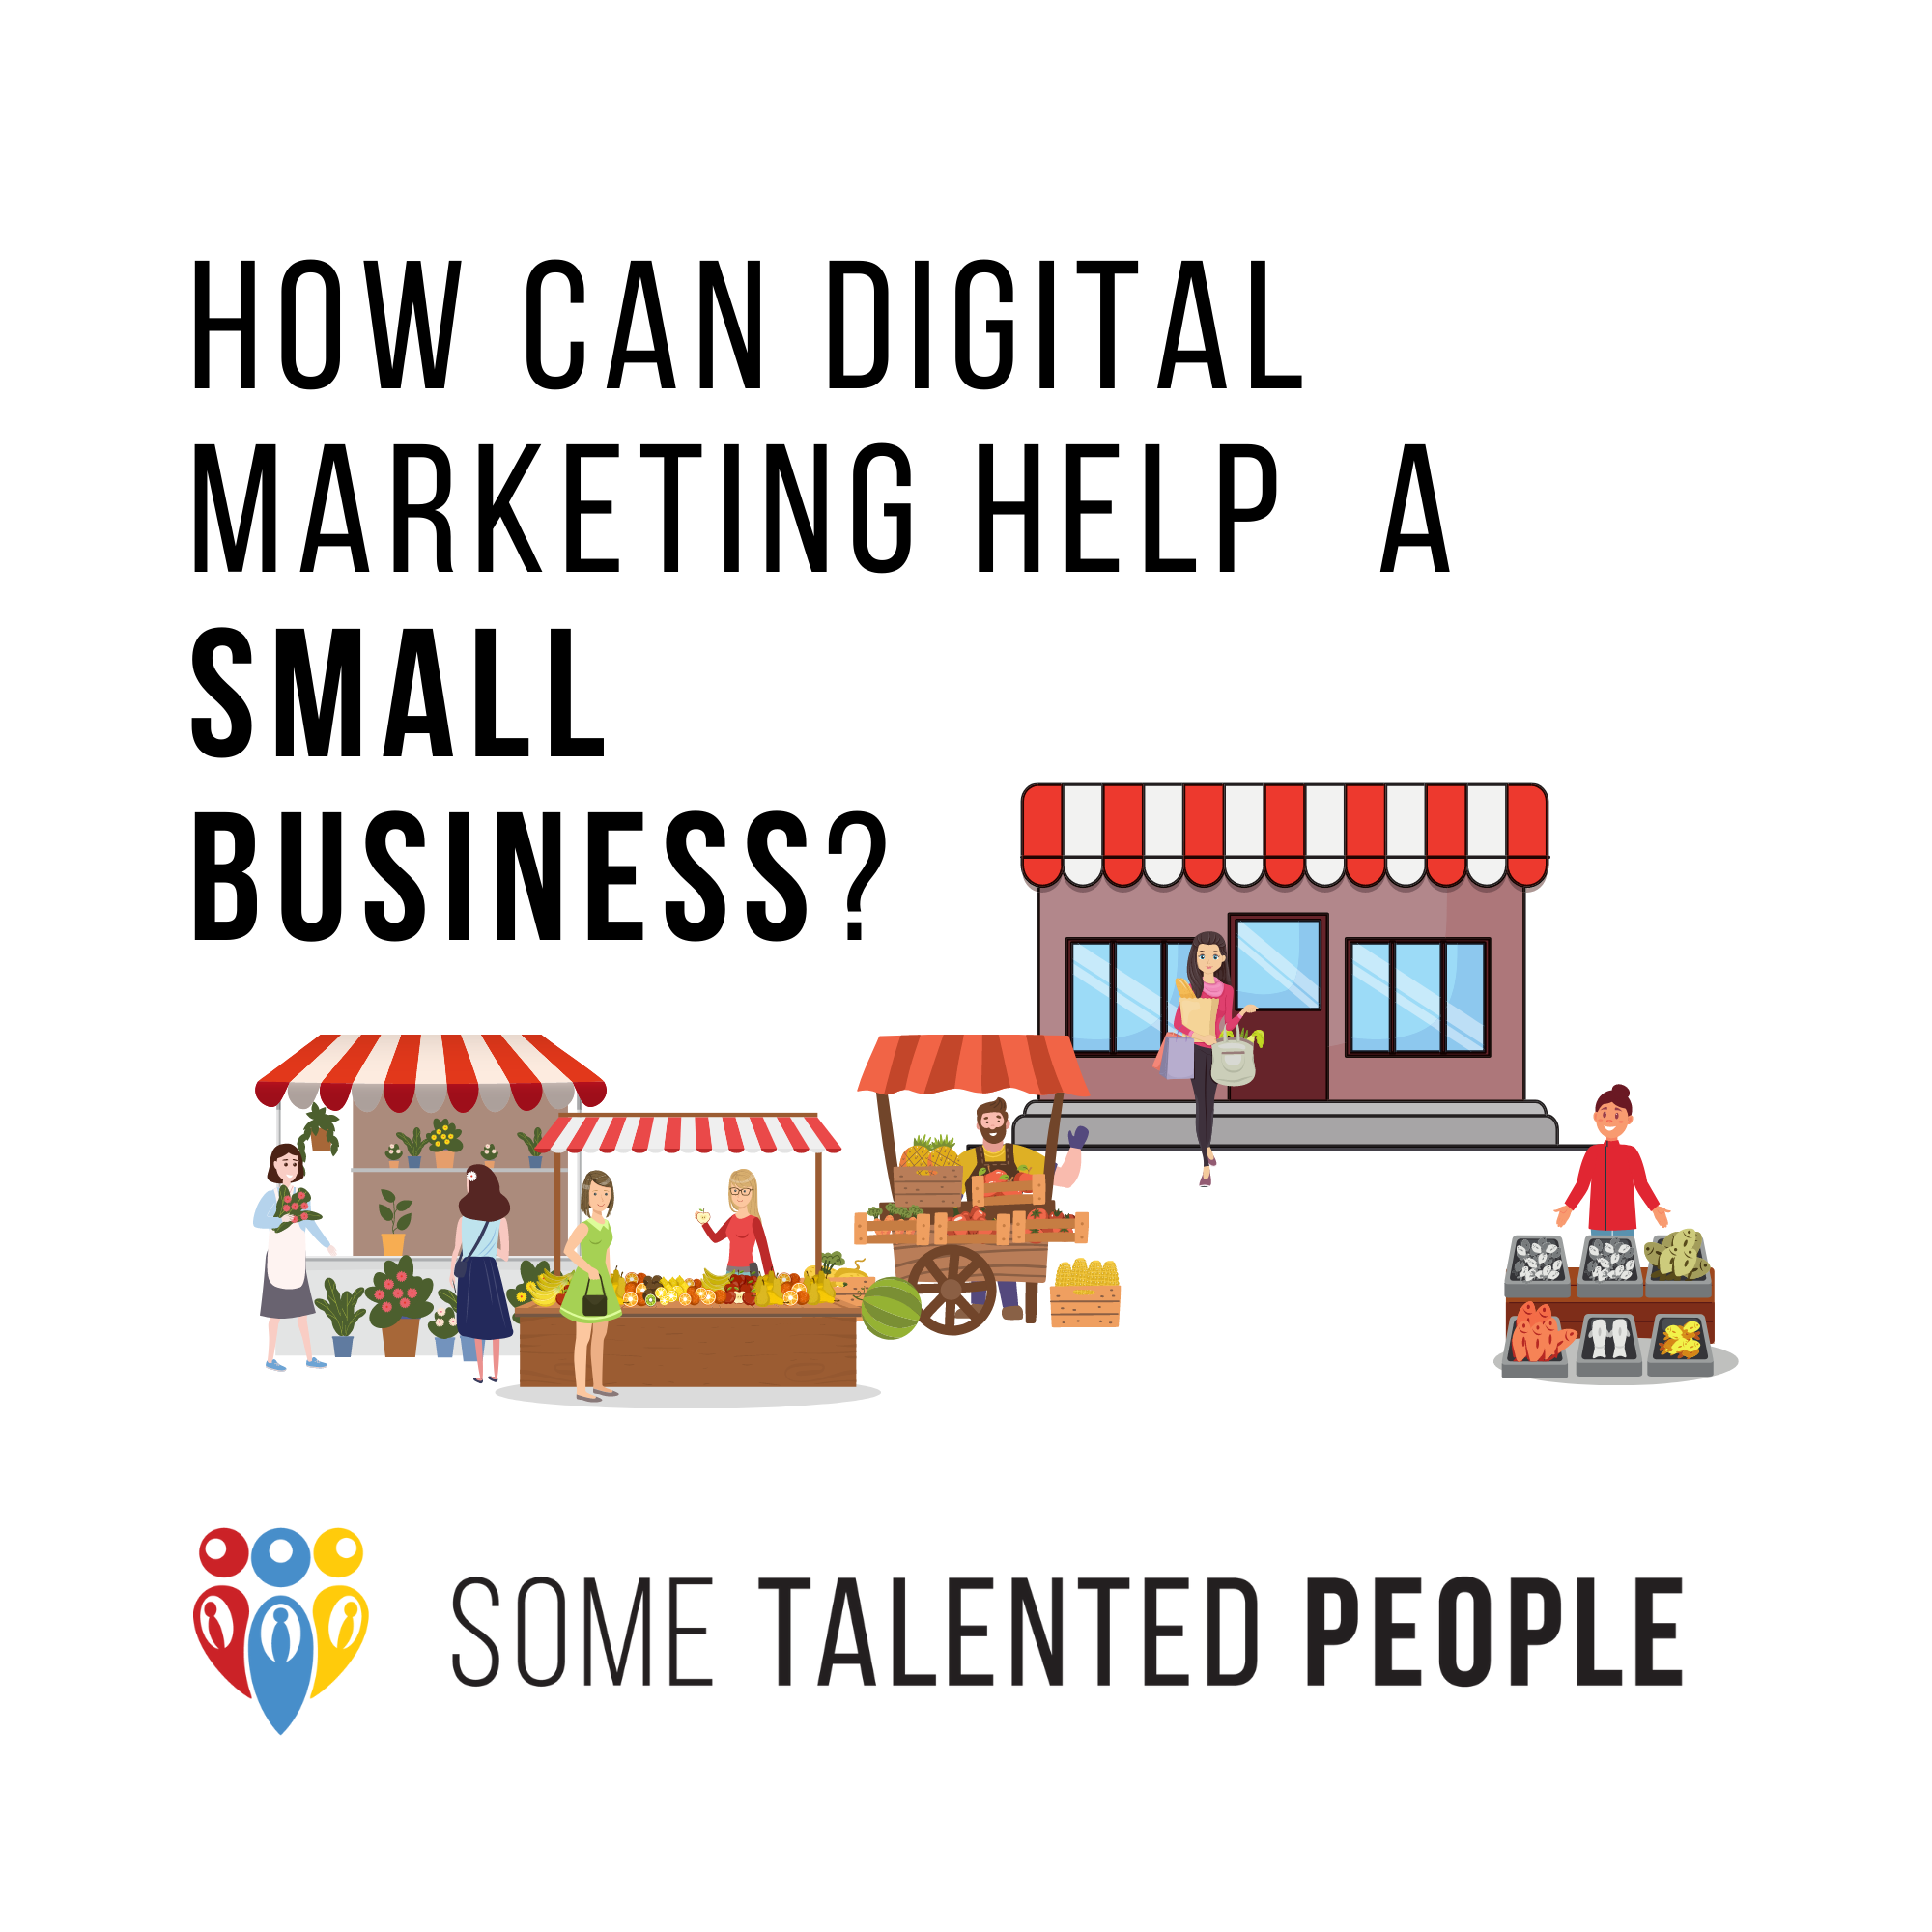 How can digital marketing help a small business